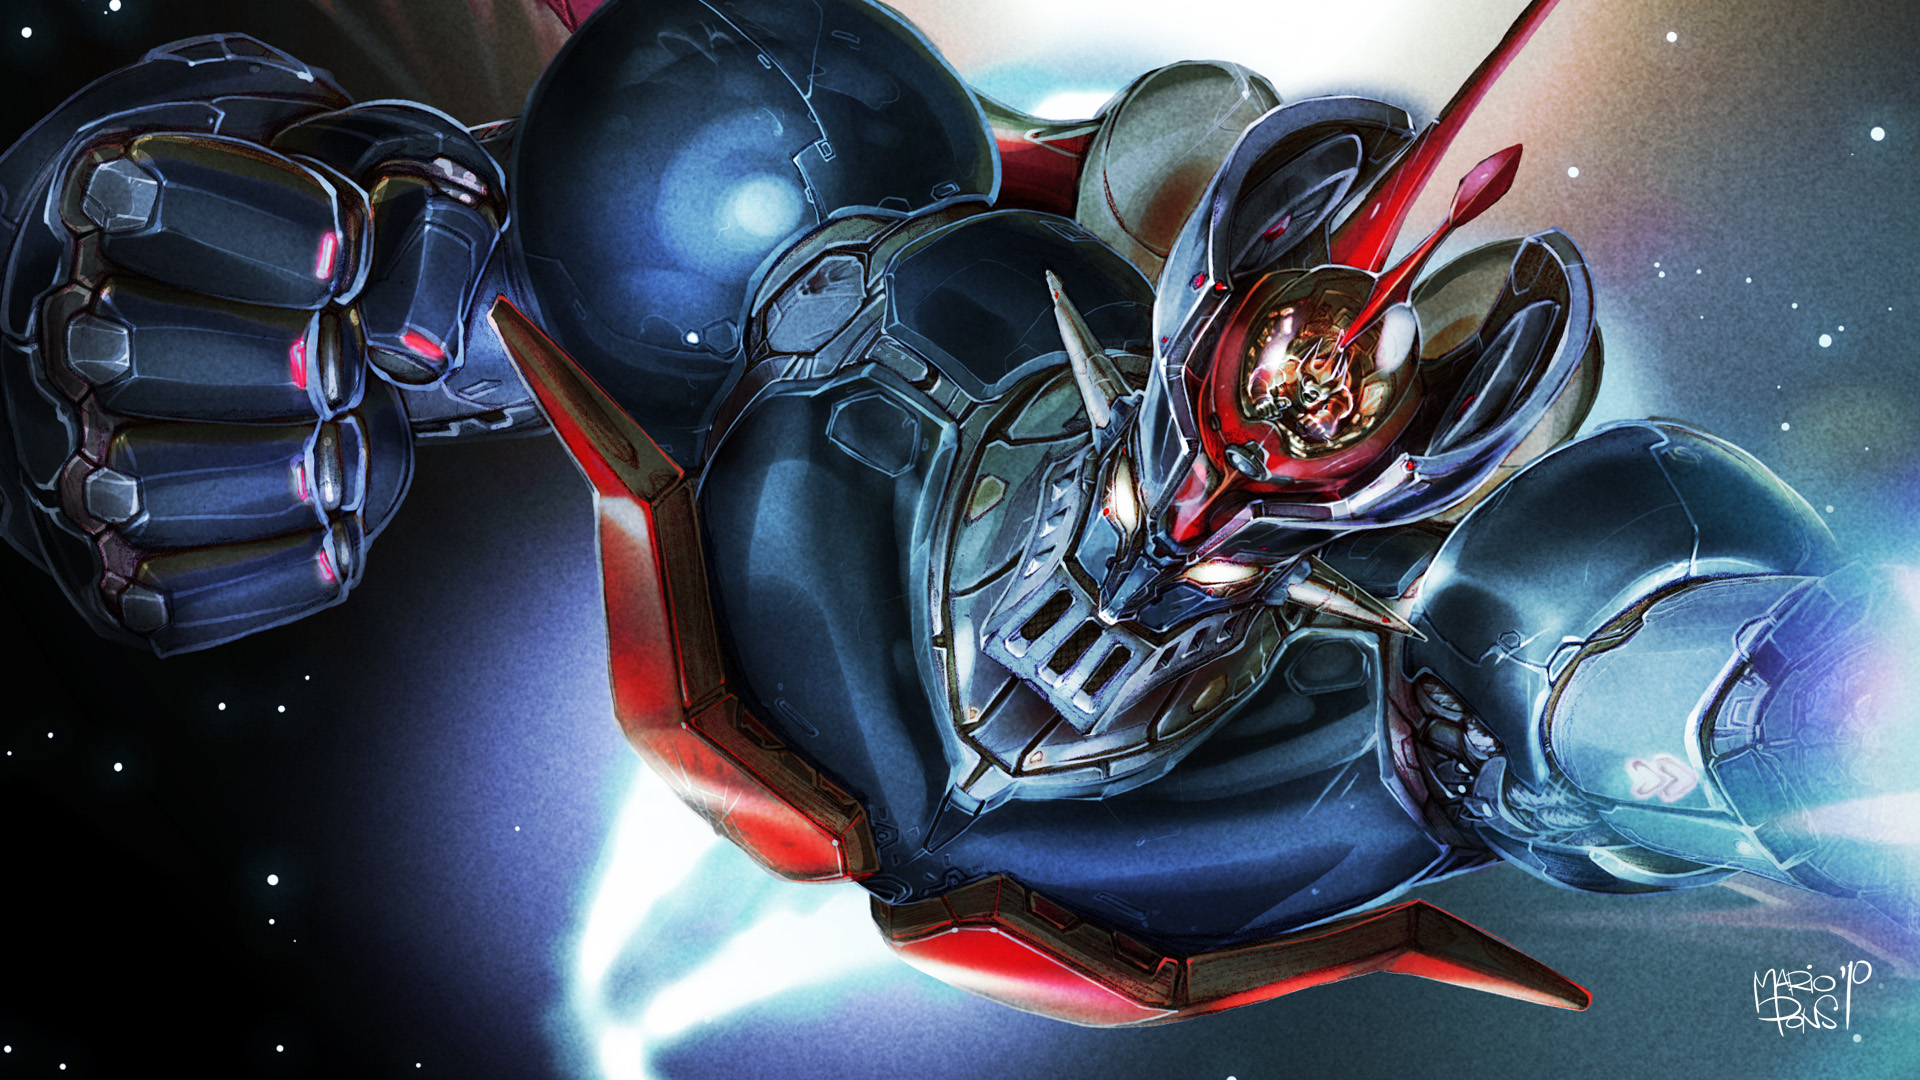 Mazinger_Z_close_up_by_MarioPons.jpg